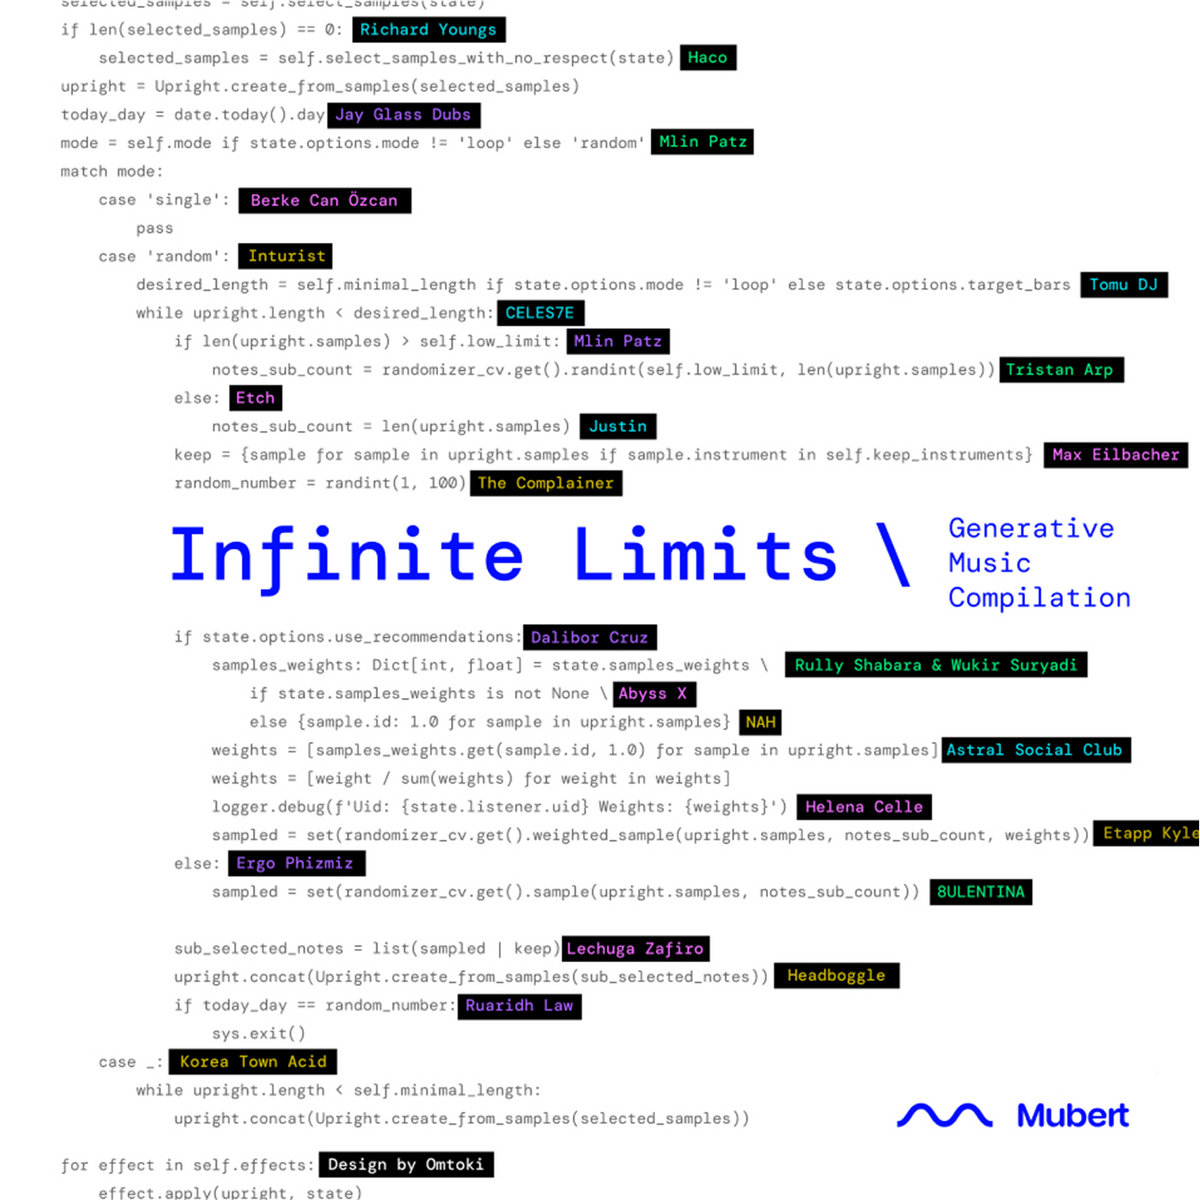 Mubert Releases AI Generated Album Titled  “Infinite Limits” in Collaboration with 25 Artists